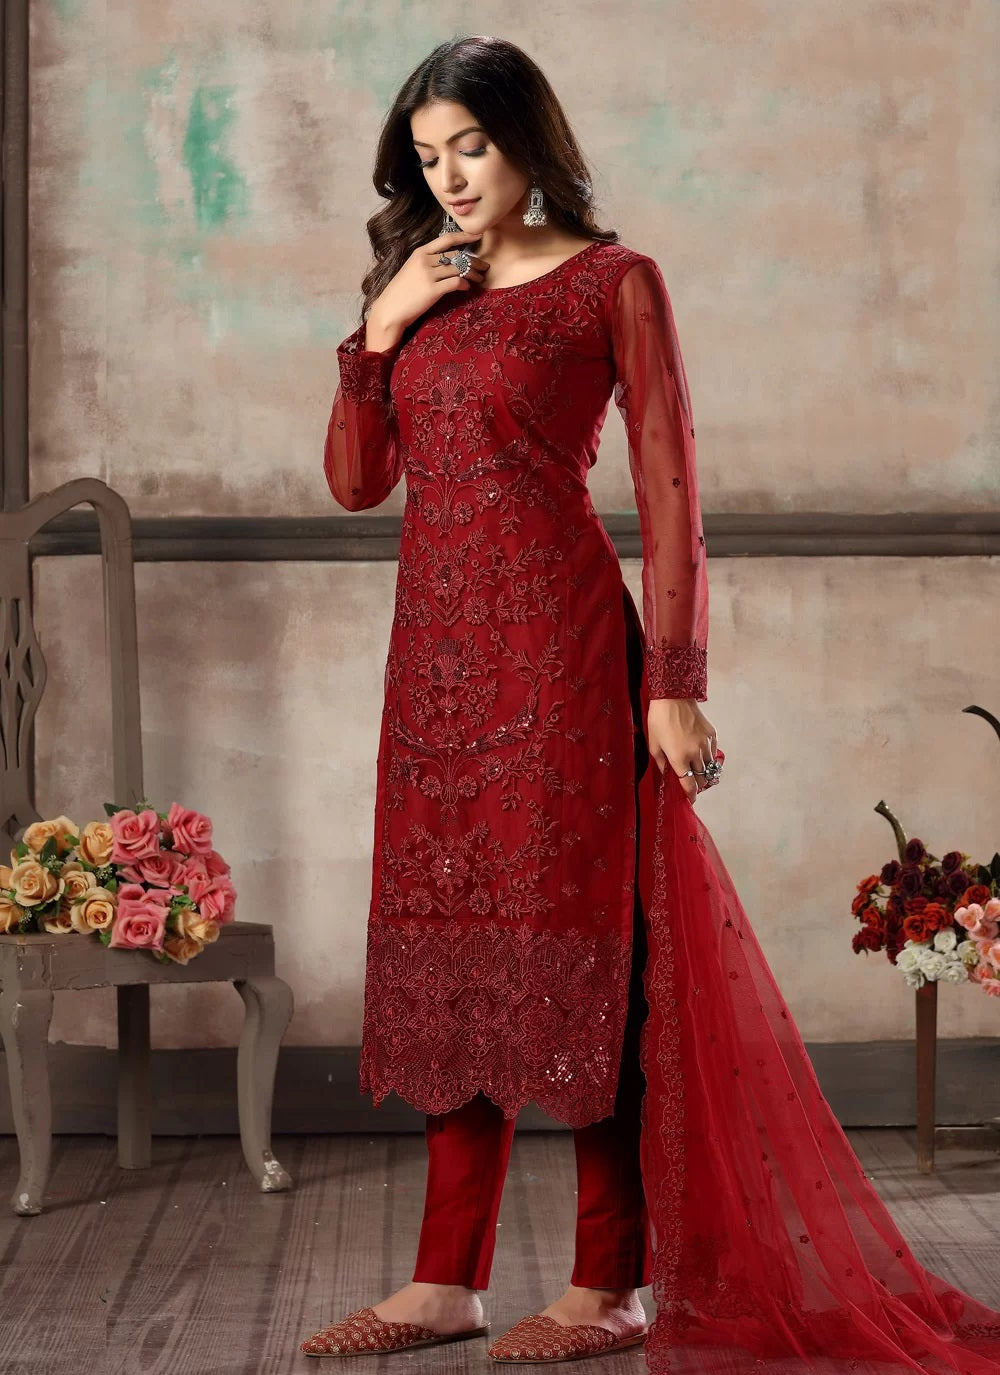 Aggregate more than 198 red sleeveless salwar suit